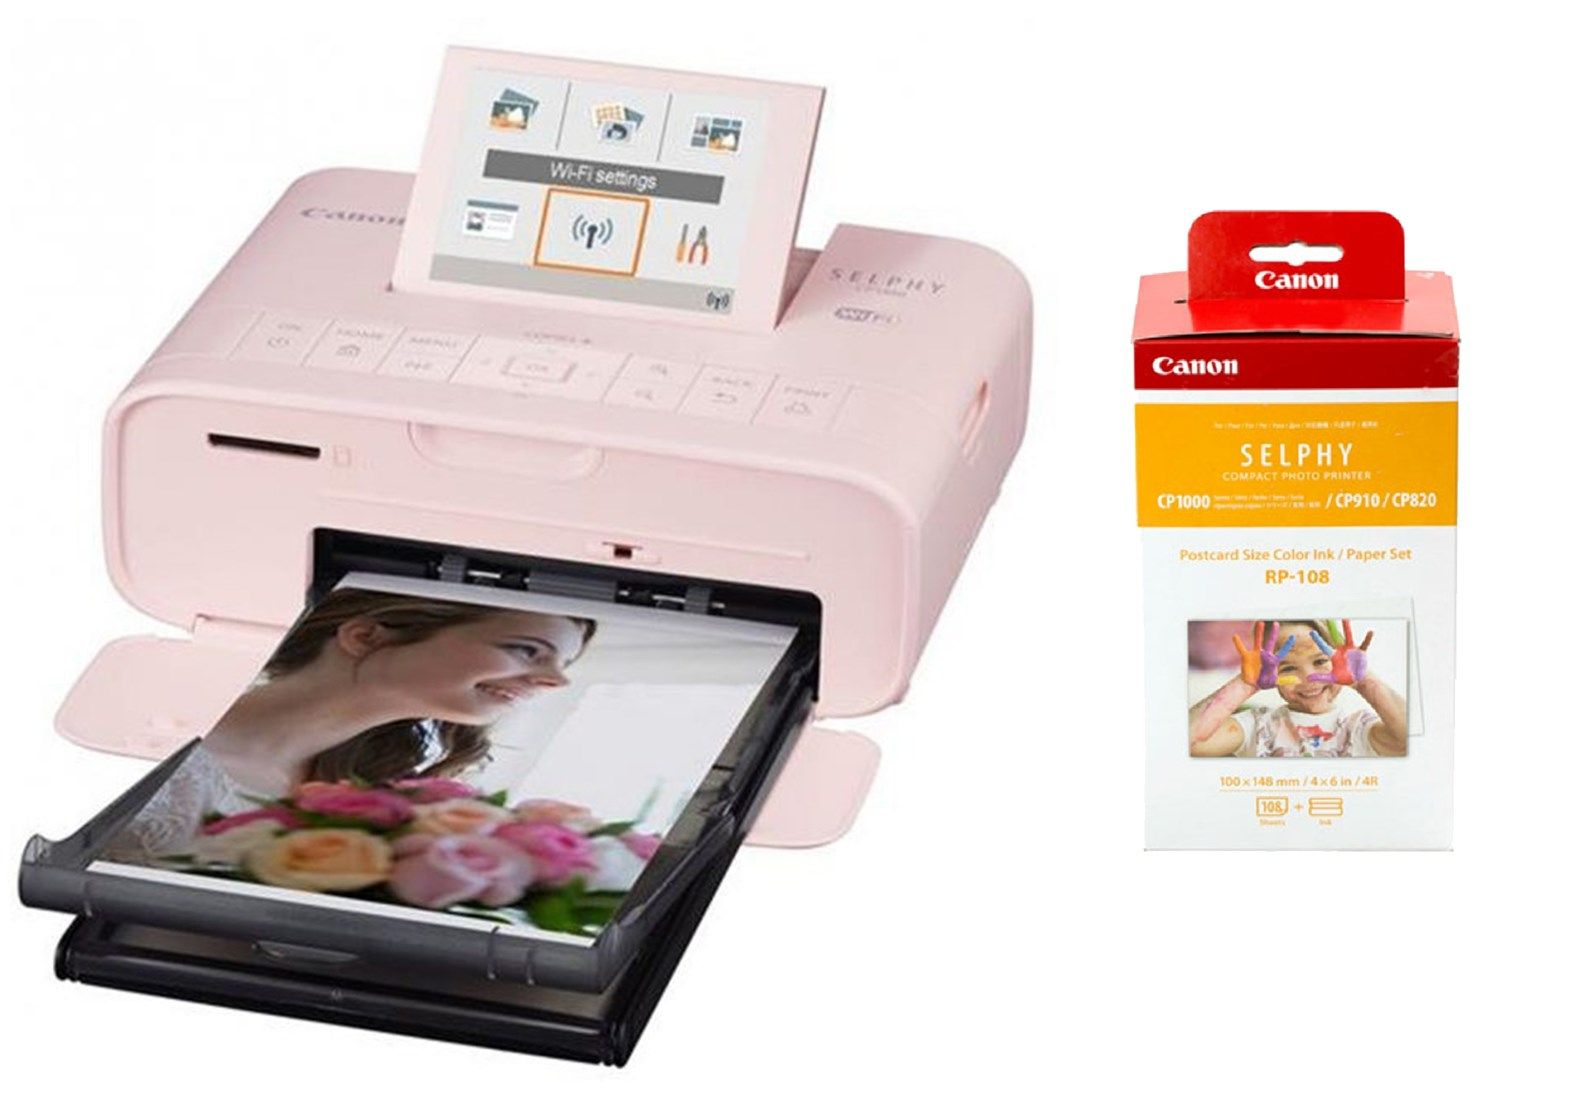 Product Image of Canon SELPHY CP1300 Compact Photo Printer - Pink & RP-108IN Ink/paper pack